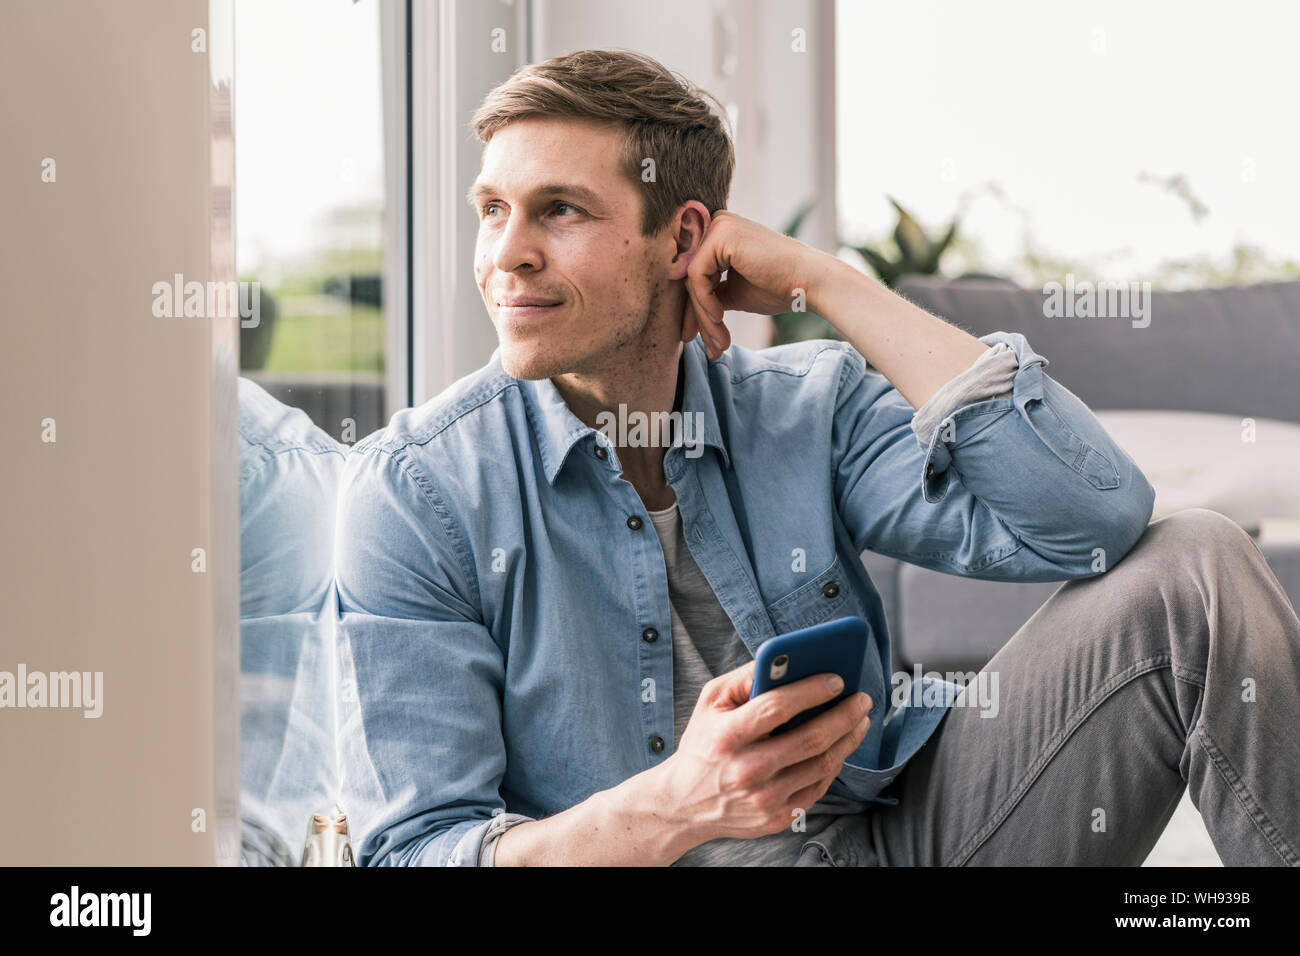 Mid adult man sitting by window, using smartphone Stock Photo